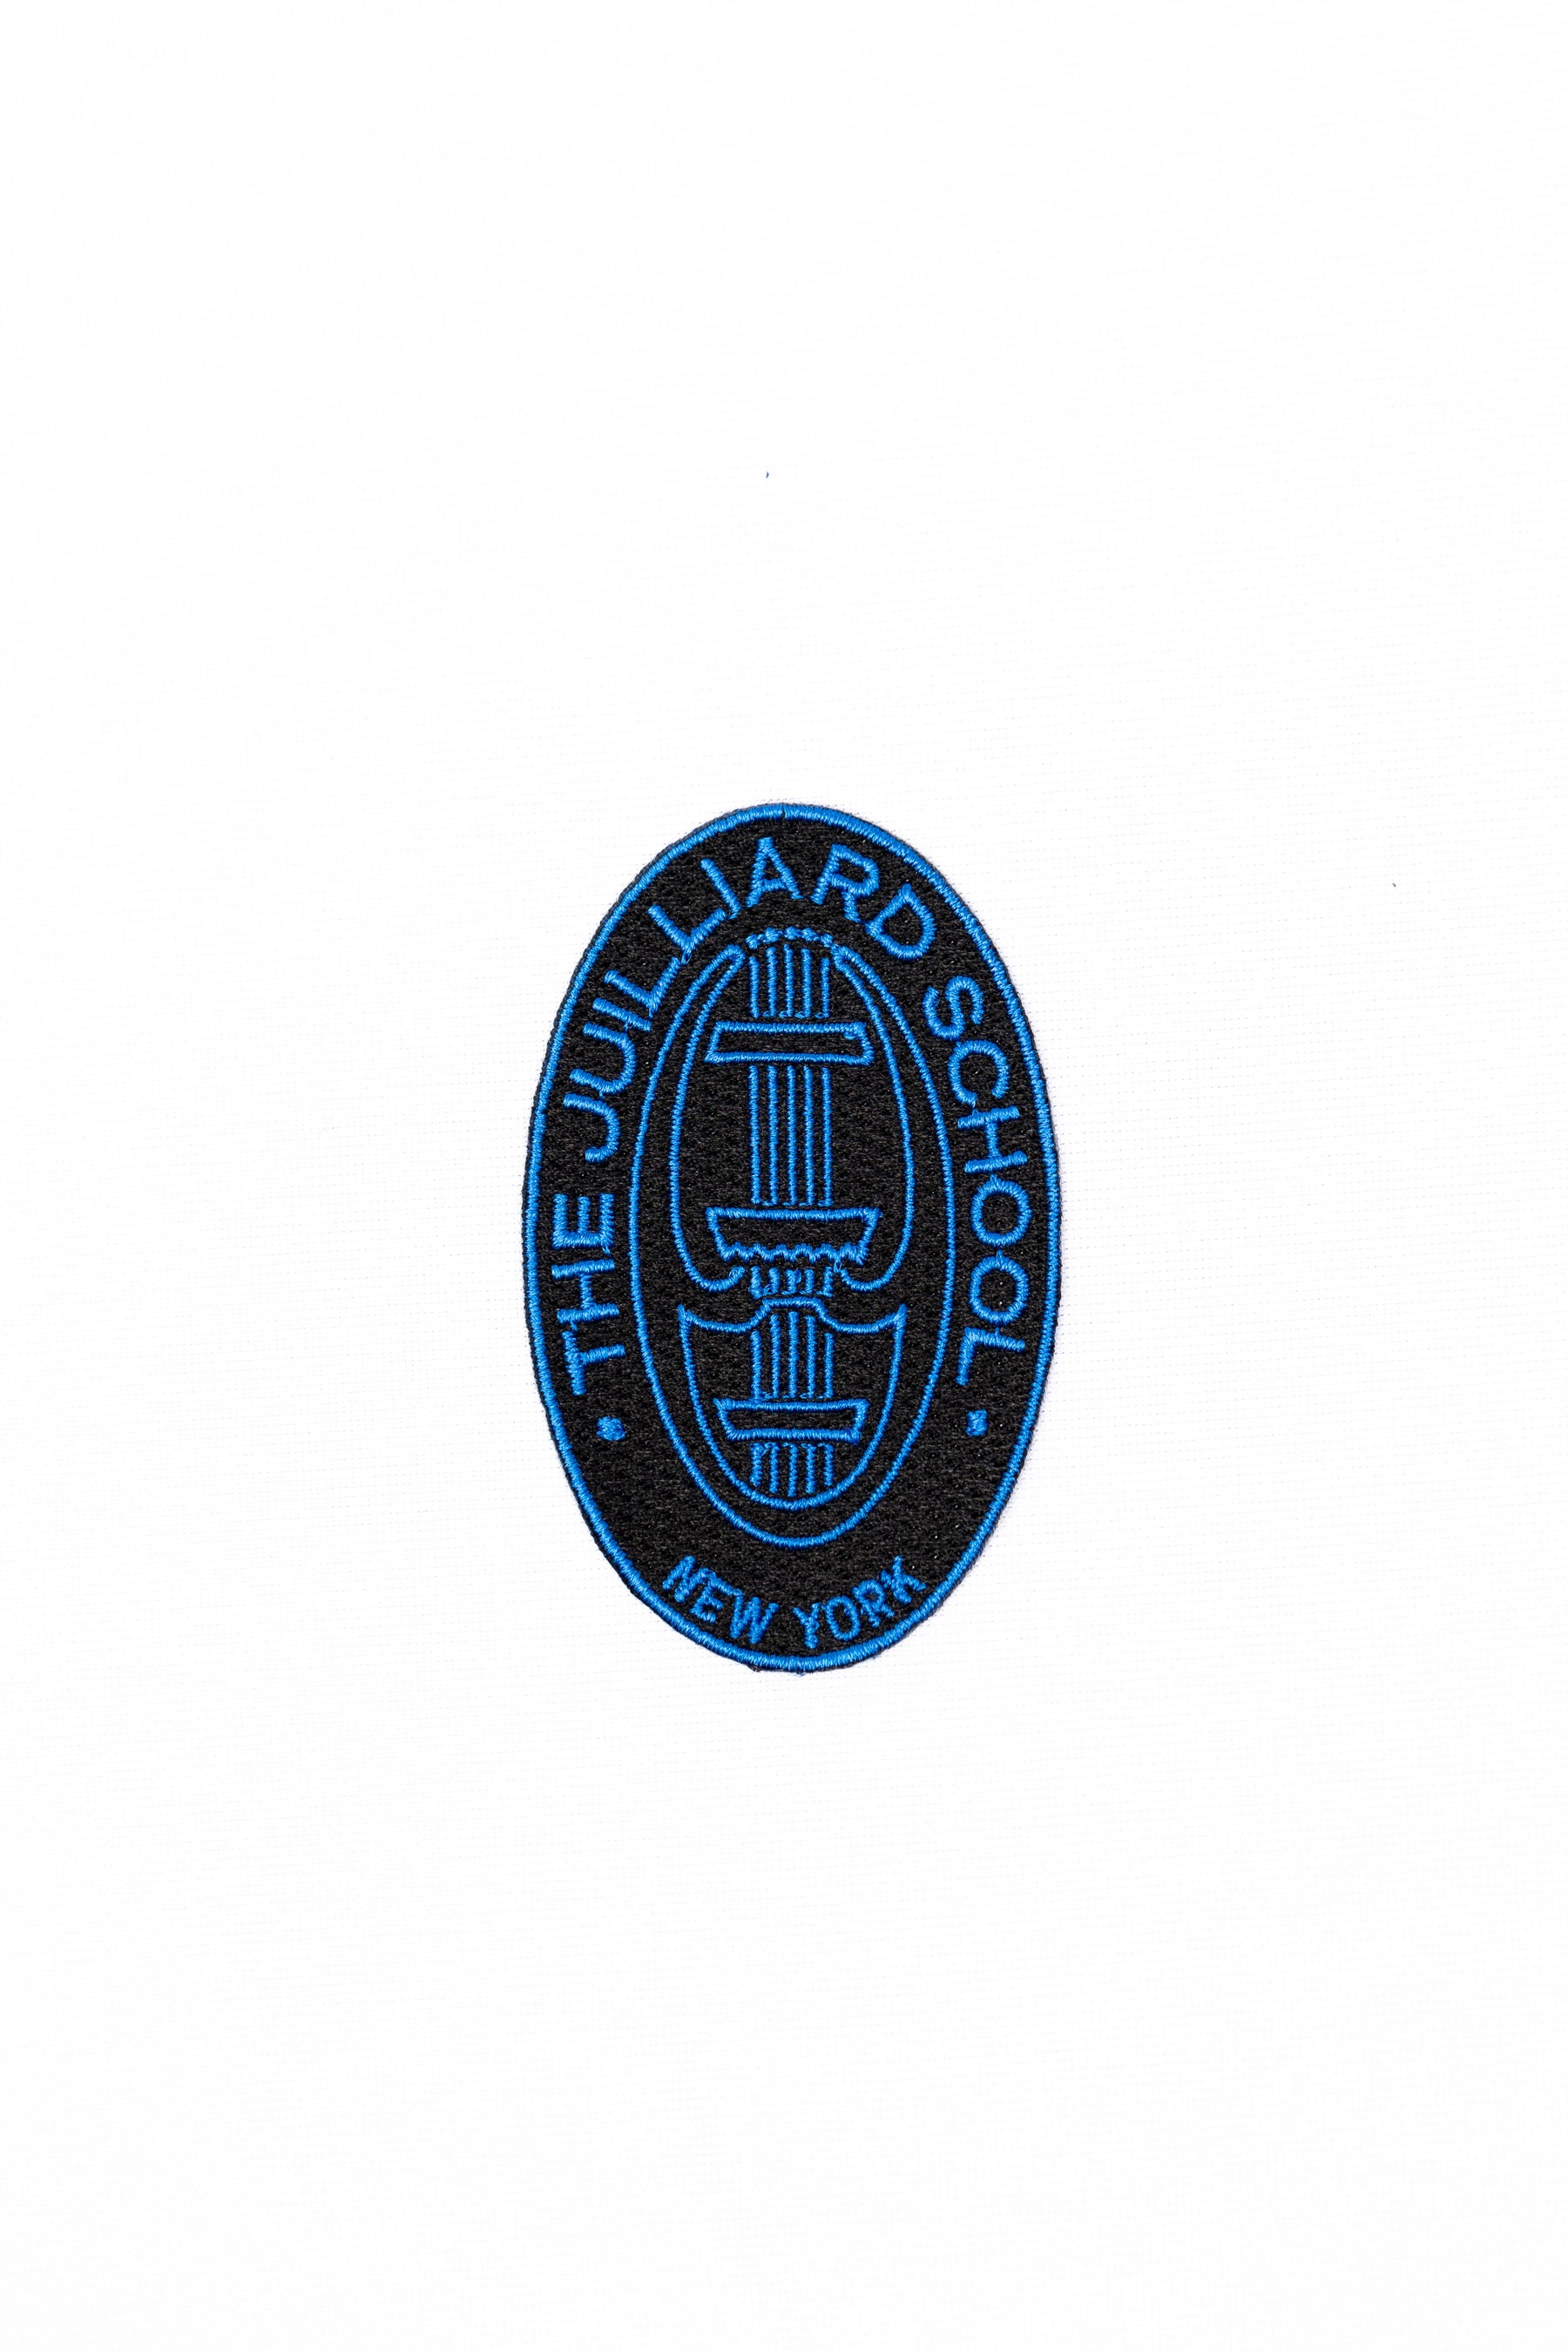 Embroidered Patch/Emblem: Seal logo for sewing on cases/backpacks